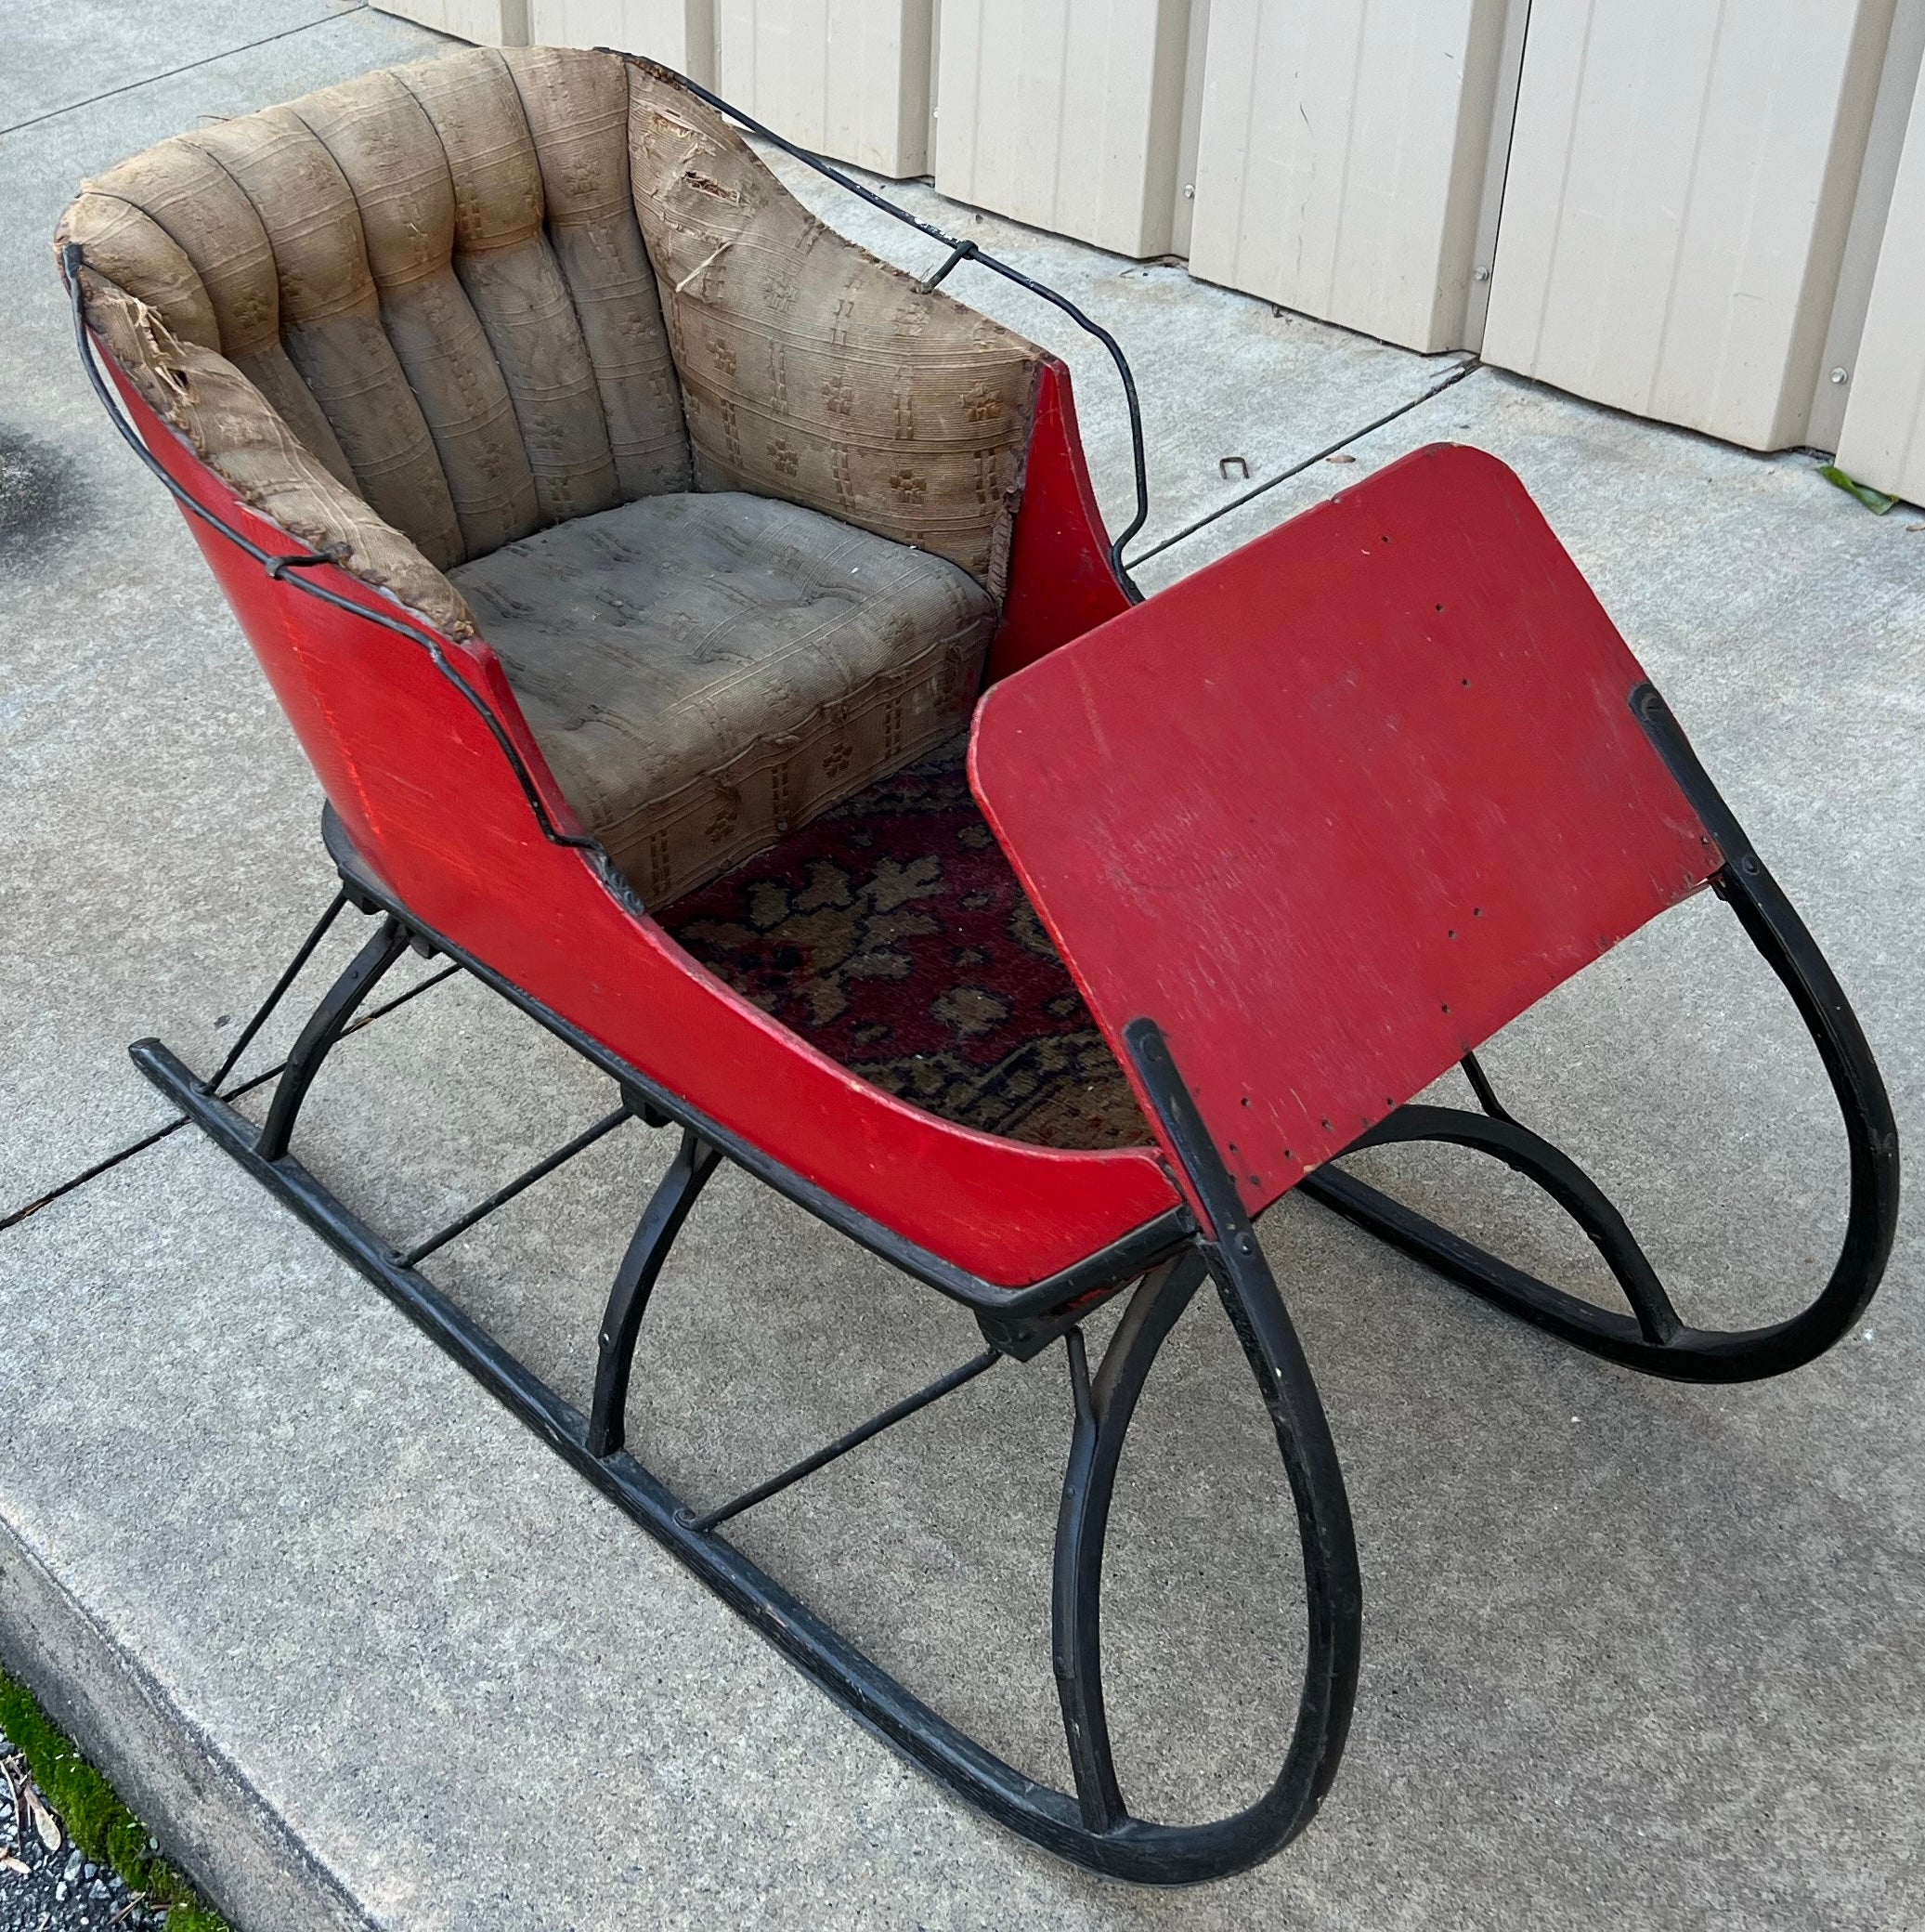 Every year I love to sell one of these! This is a Victorian Era child’s sleigh. It’s festive red is original paint! The footbed is lined with an antique carpet remnant. The channel back does show a bit of wear but oh what fun!